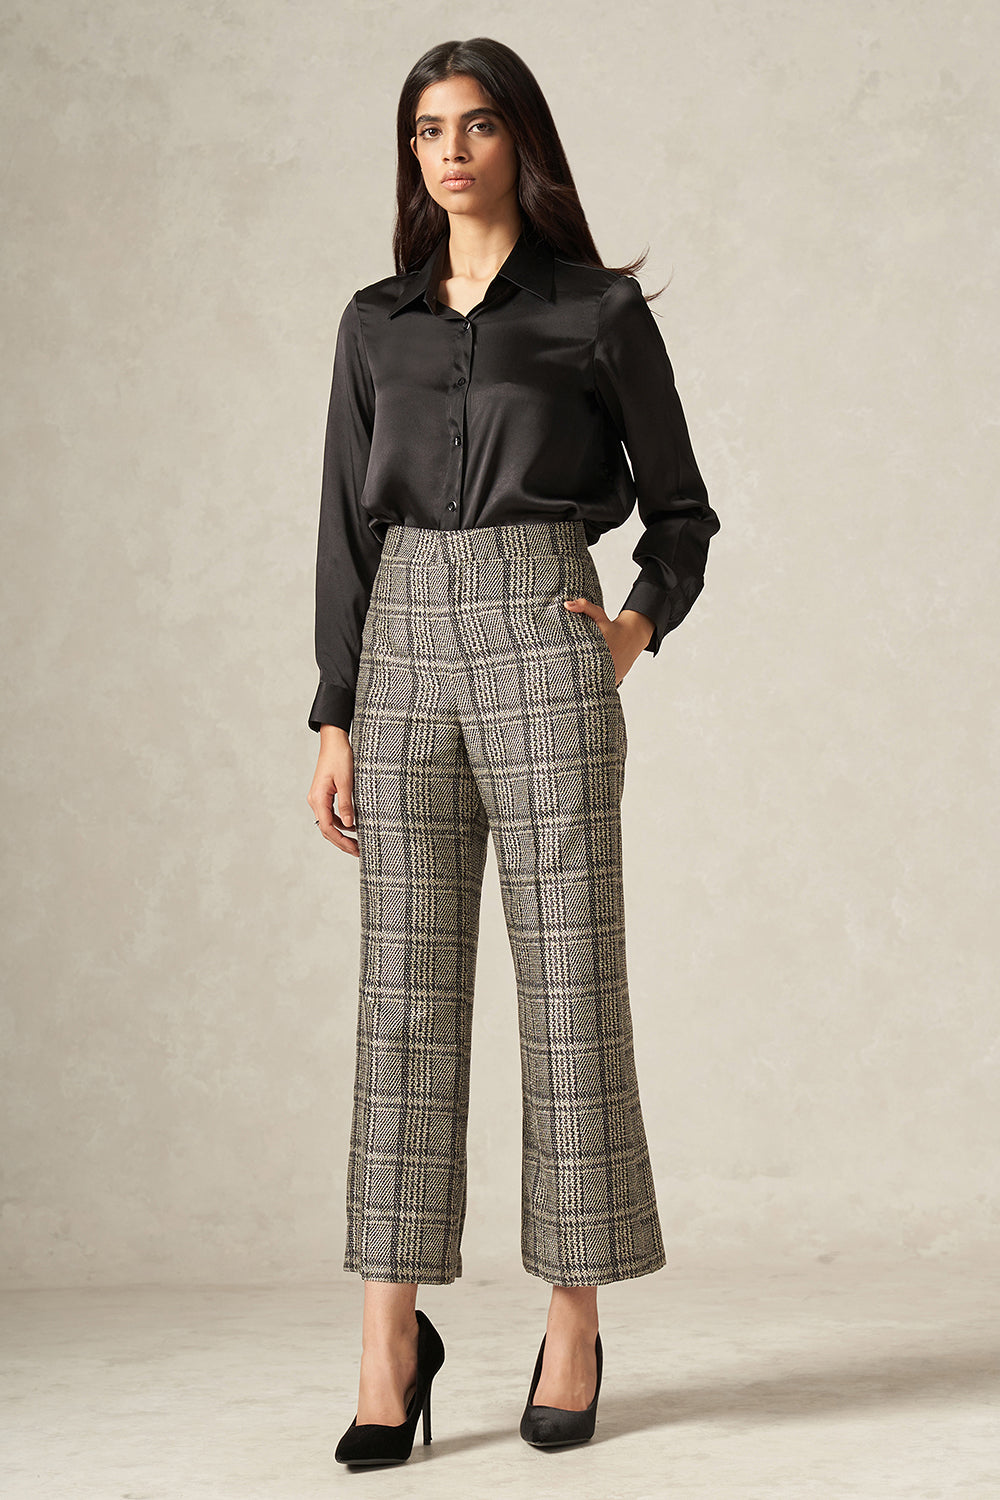 Black and White Pure Silk Handwoven Plaid Patterned Pants - Tilfi